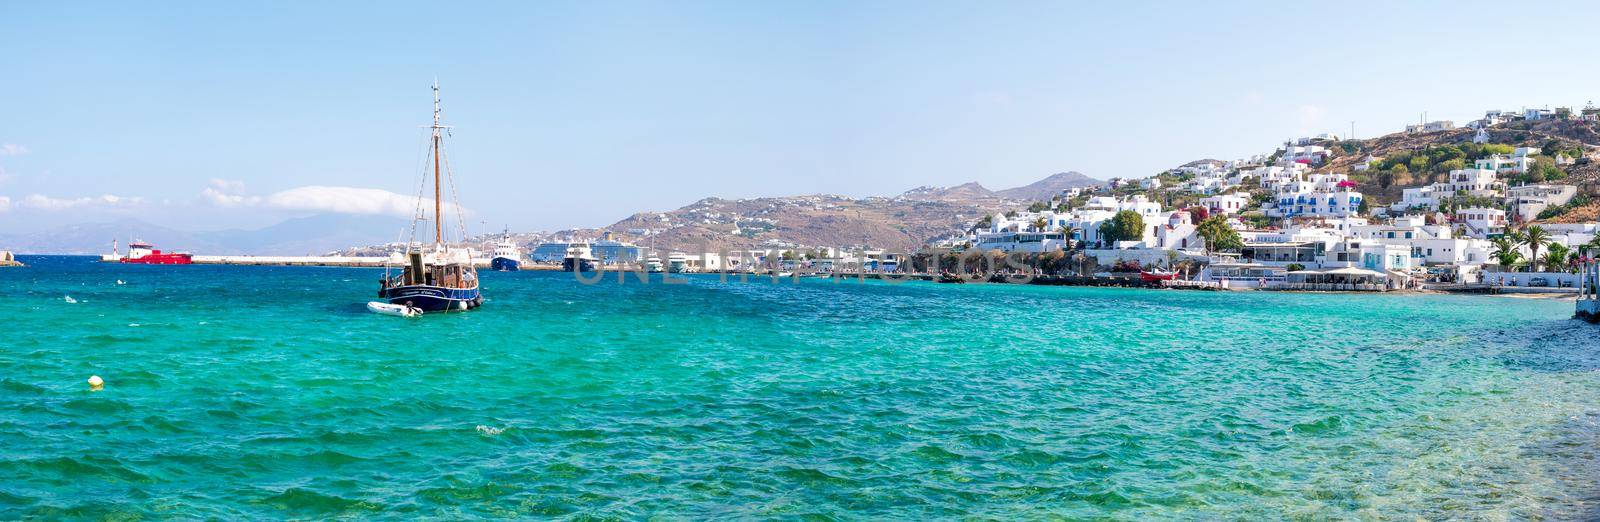 Panoramic view of Greek seaside town with whitewashed houses and floating ships in the water